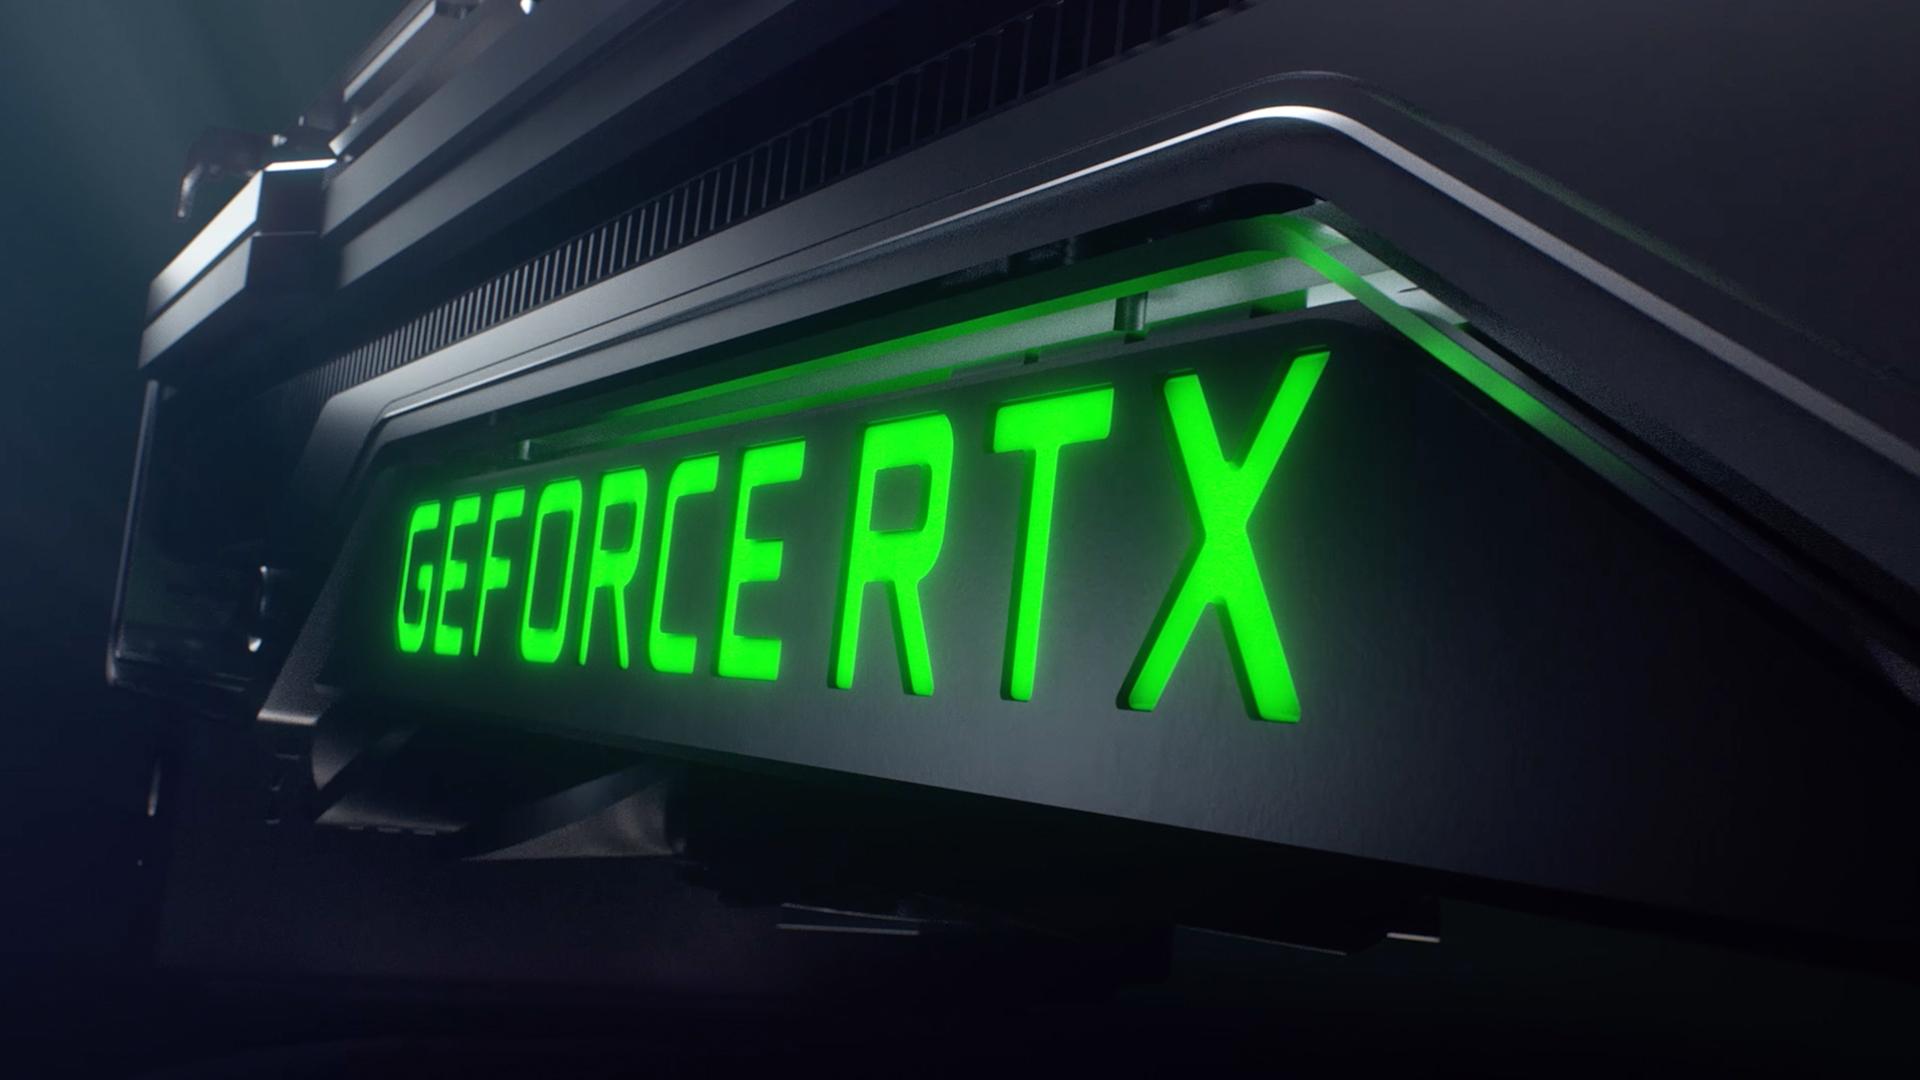 Best Buy: NVIDIA GeForce RTX 2070 Founders Edition 8GB GDDR6 PCI Express 3.1 Graphics Card 9001G1602550000